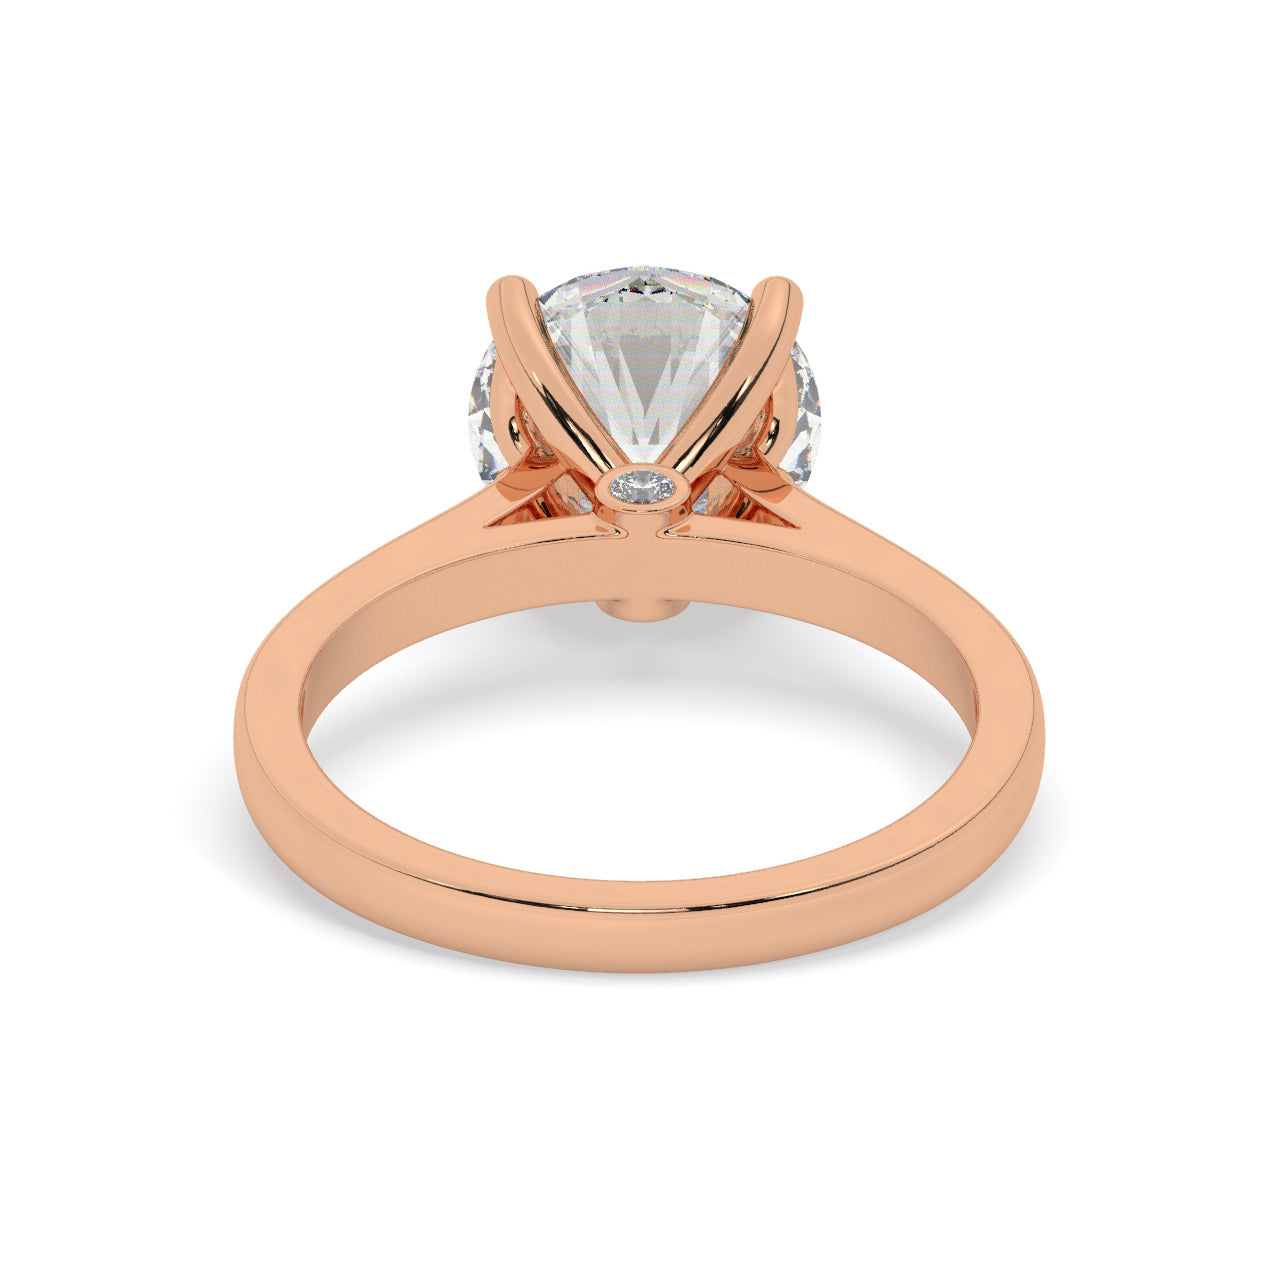 Rose Gold Round Cut Solitaire Engagement Ring with a Hidden Stone - Back View